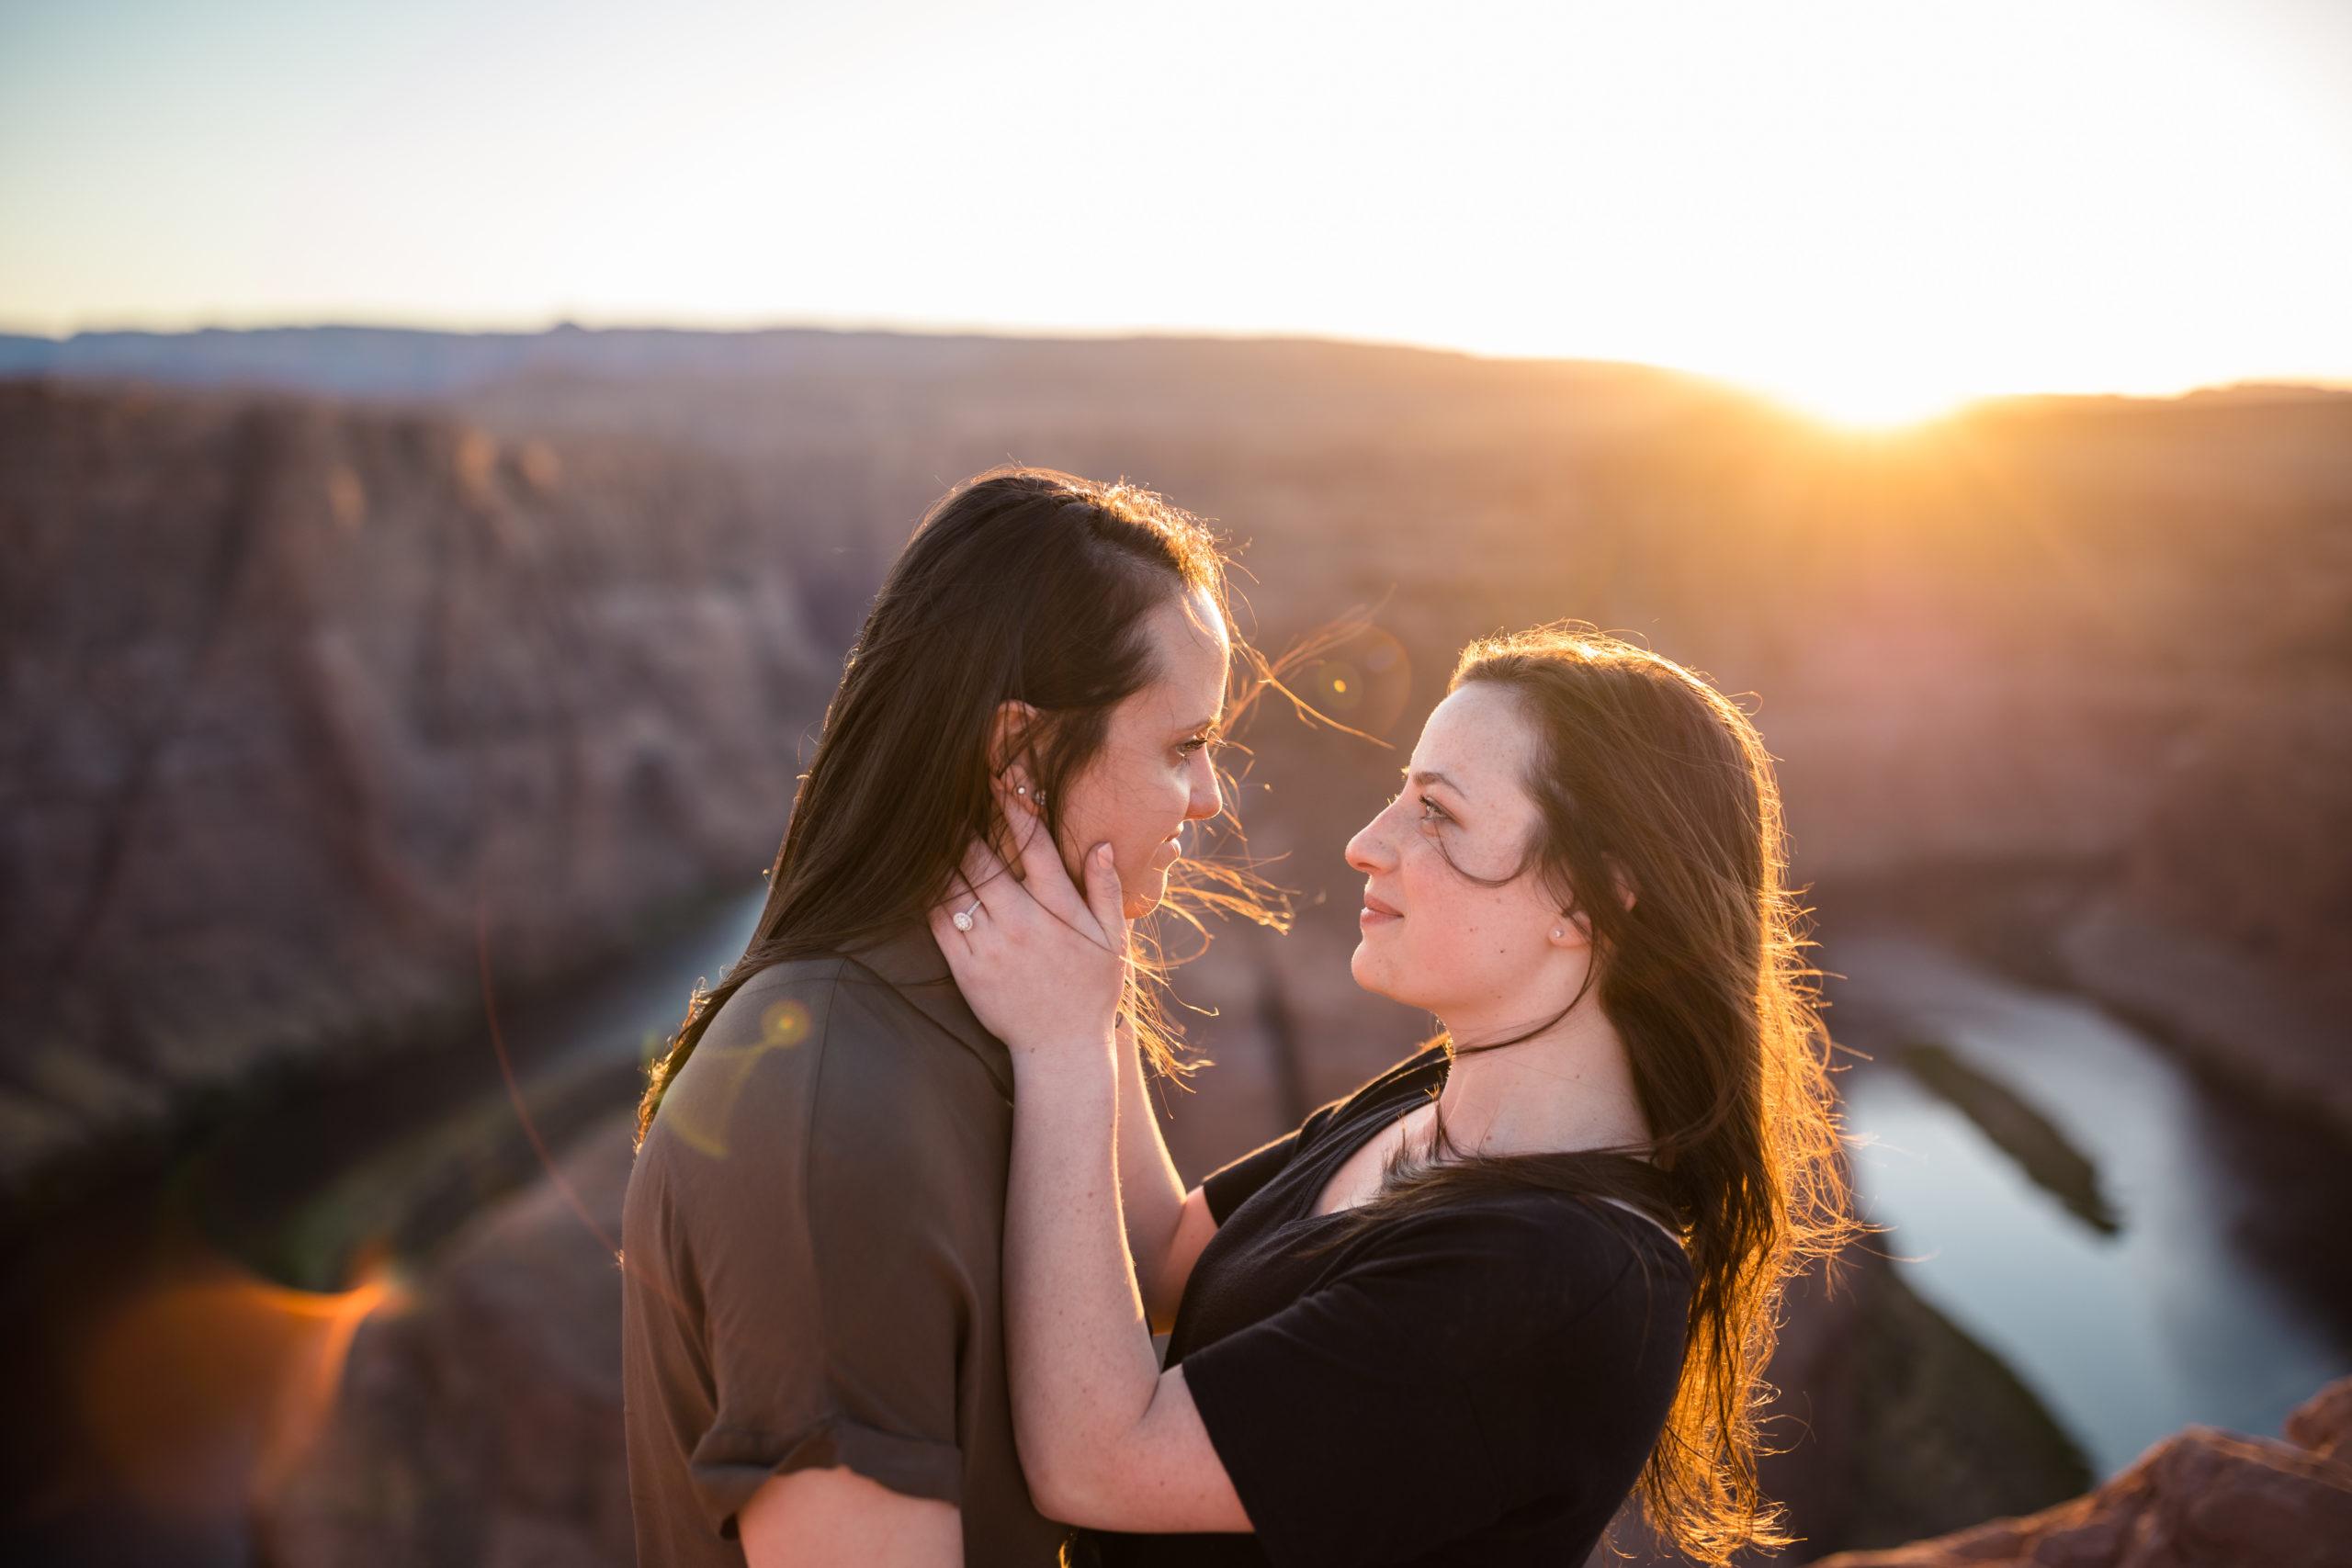 Couple looking at each other endearingly, with a breathtaking view of the sun and of Horseshoe Bend behind them, captured by Makayla MacGarvey